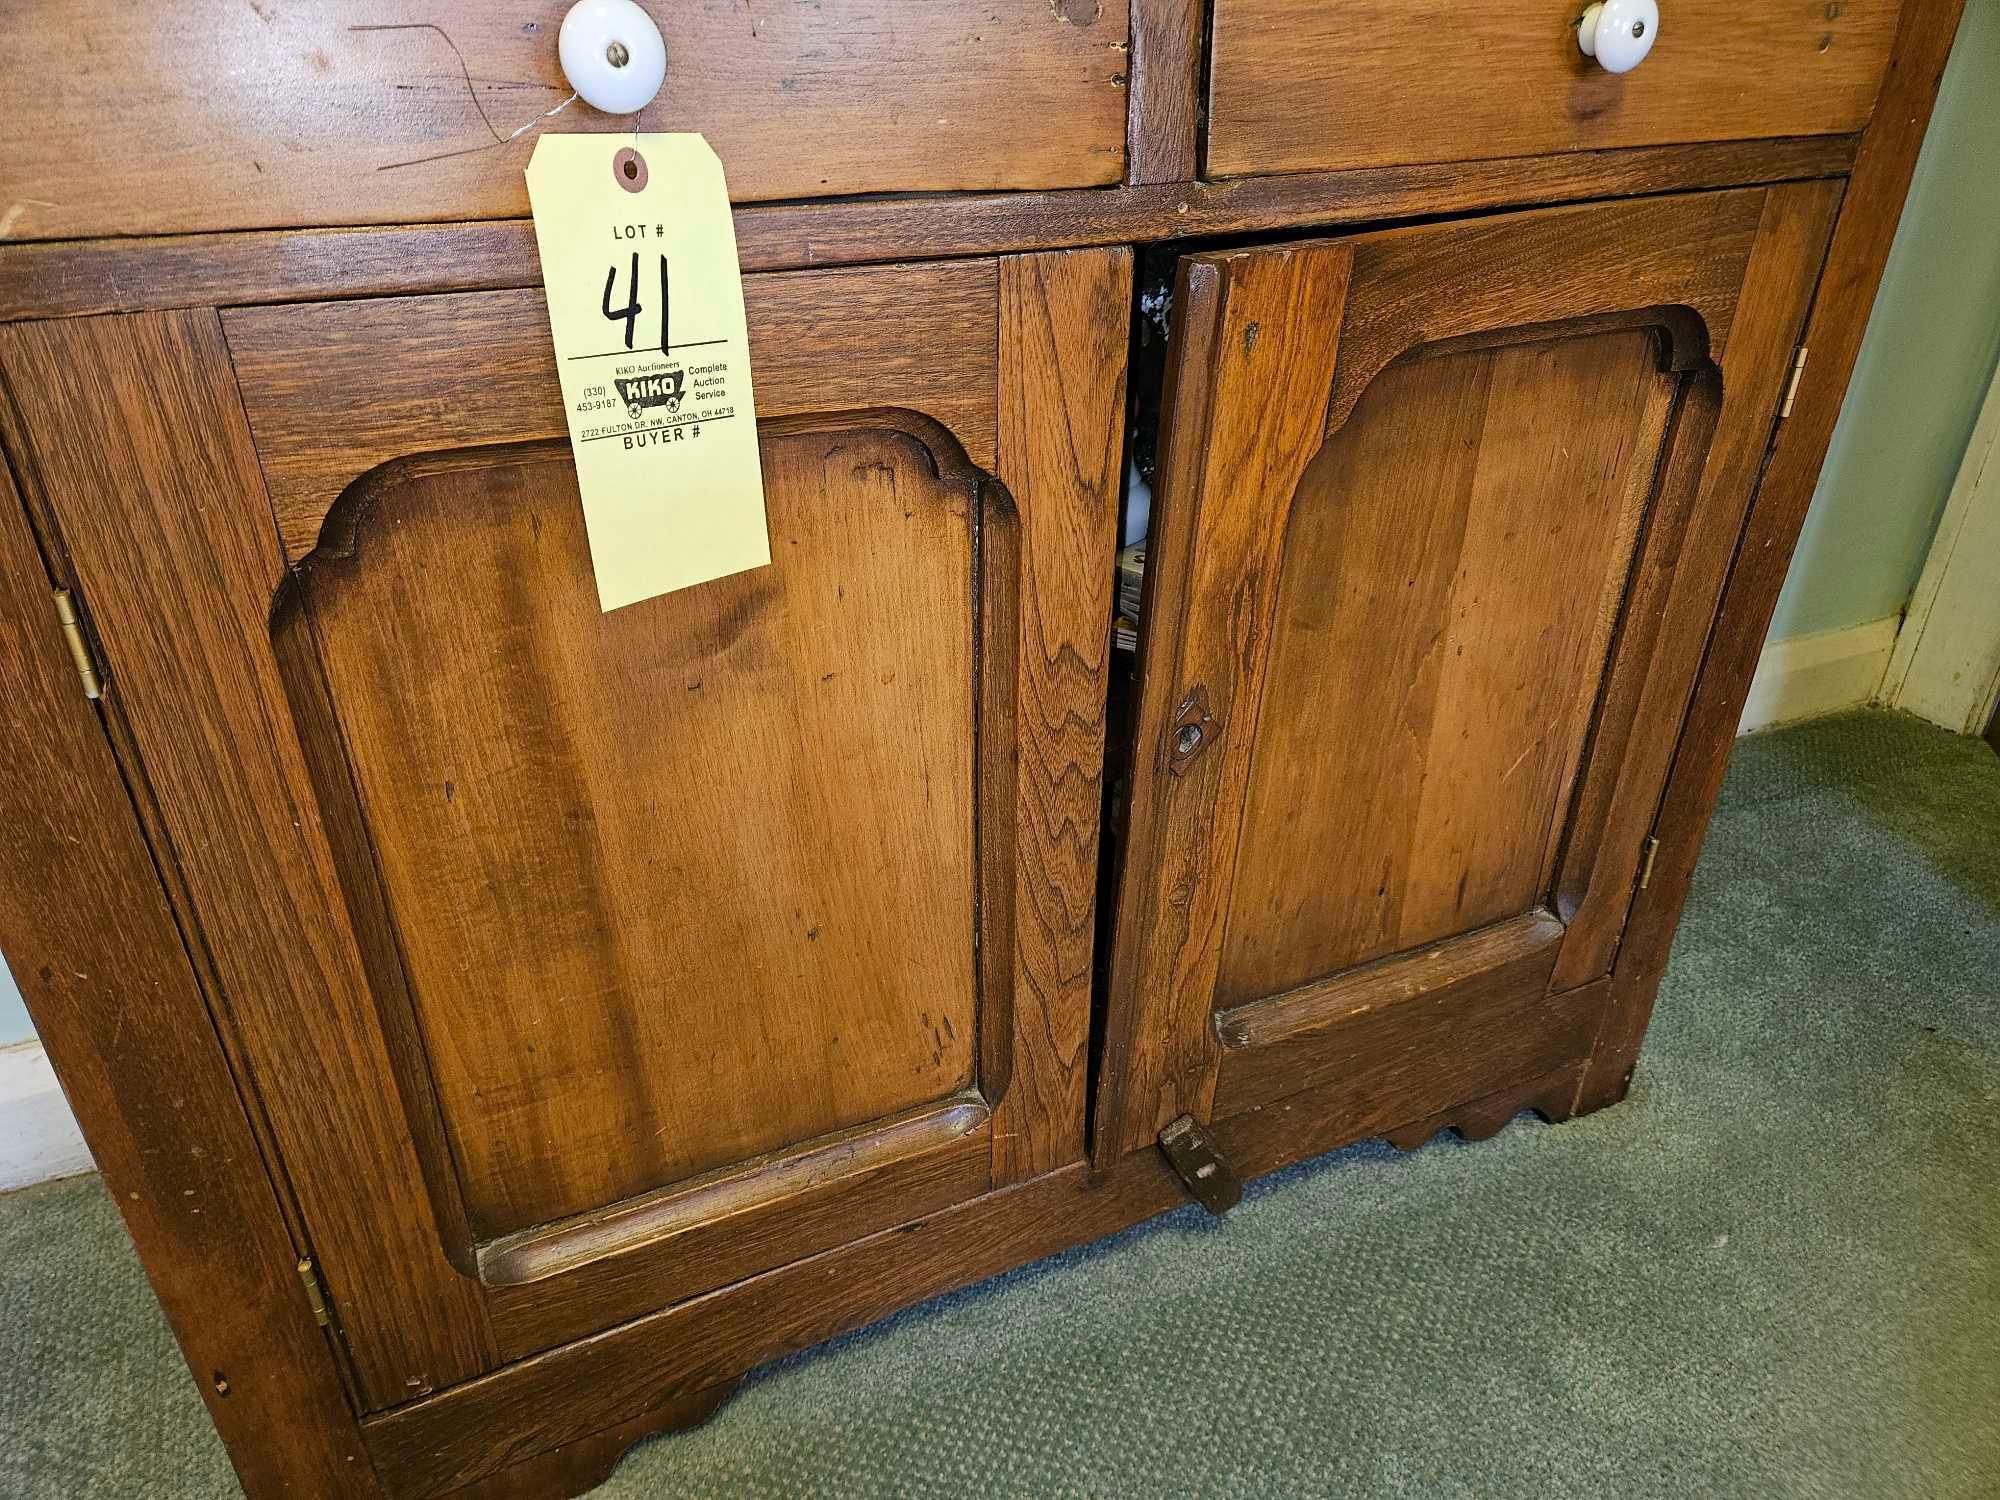 Vintage Oak Kitchen Cabinet - Contents not included in this lot.